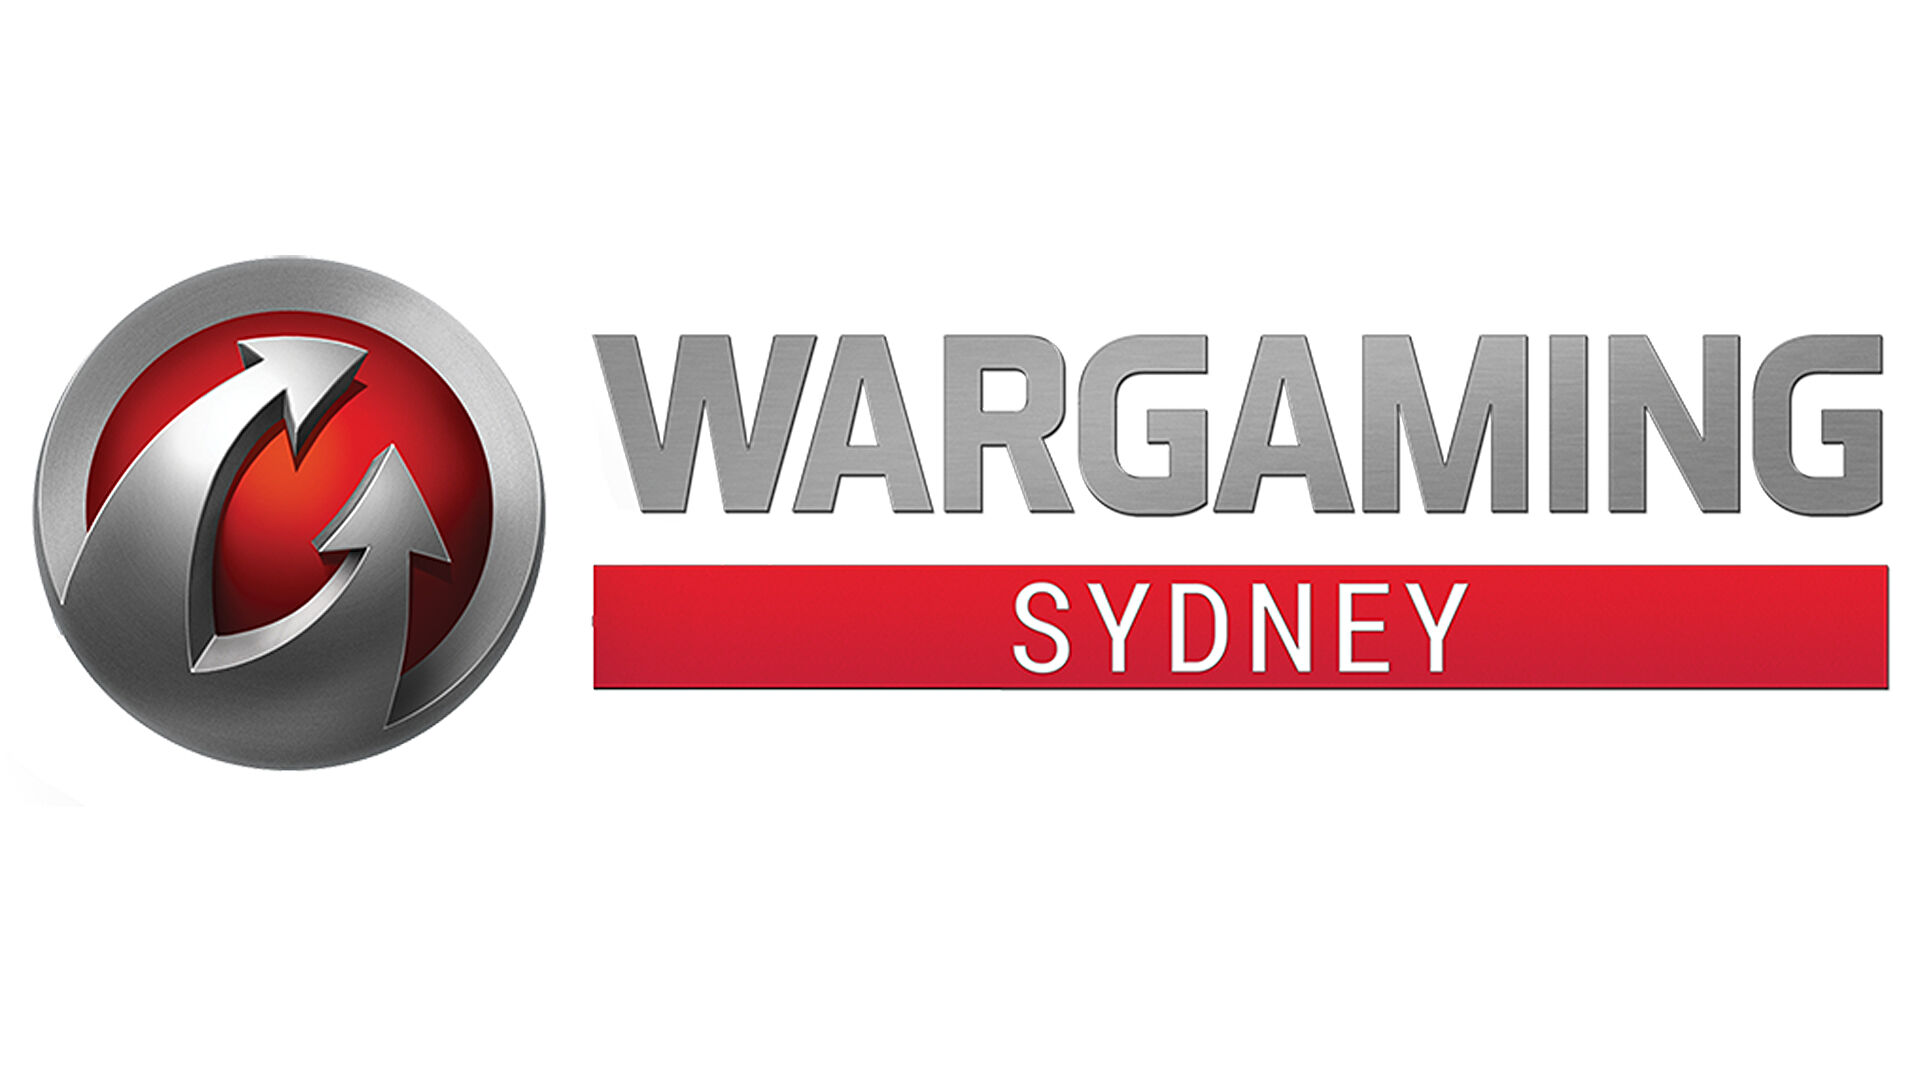 Riot Games has acquired Wargaming Sydney, now simply called Riot Sydney